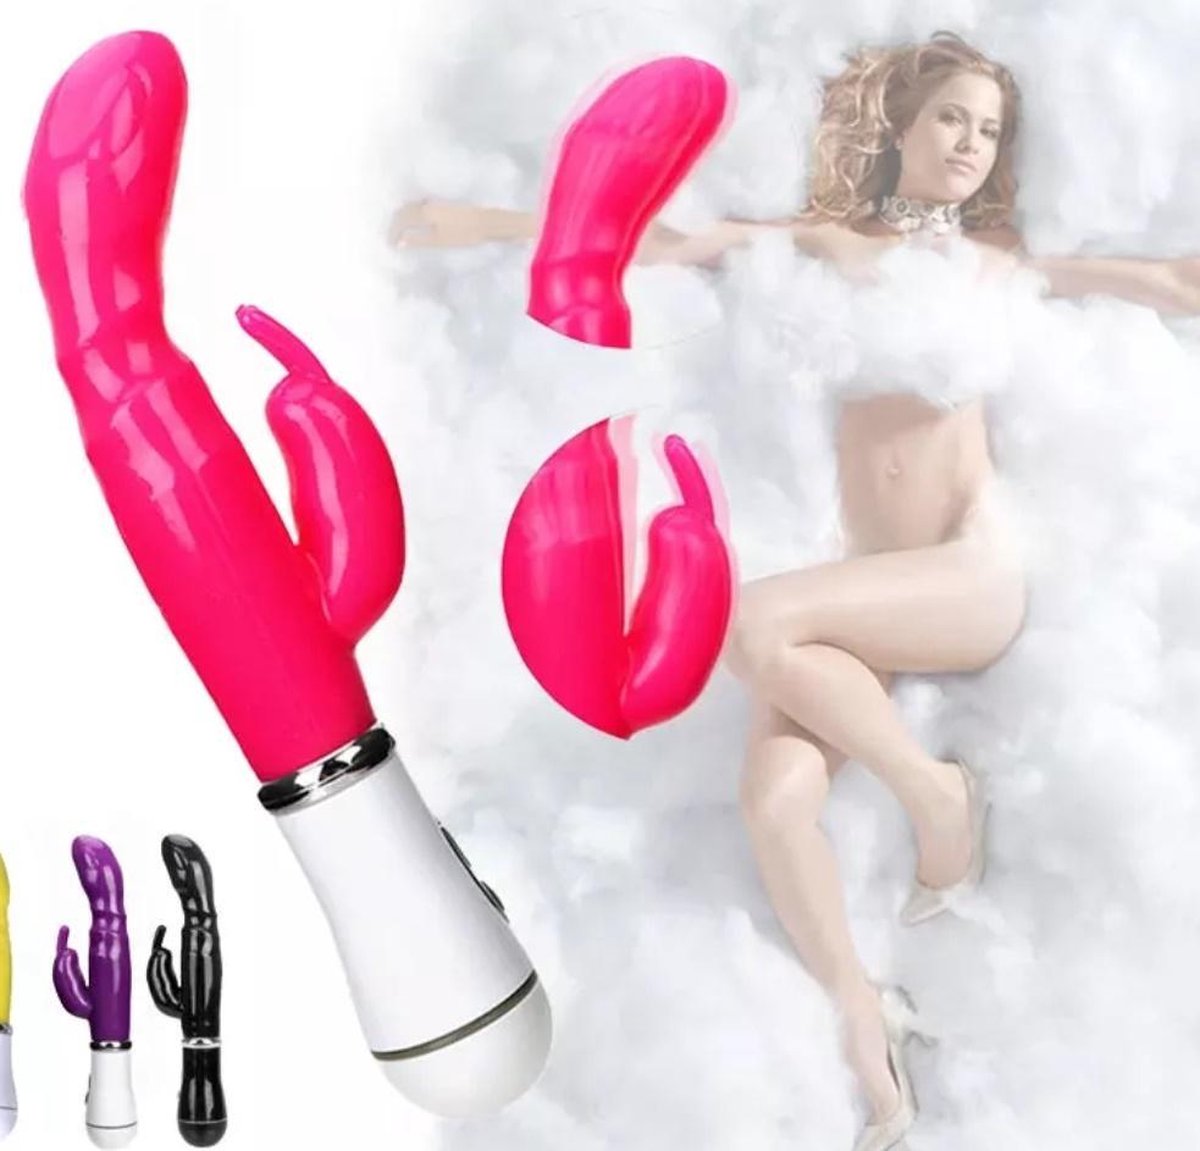 G spot clitores vibrator 3 in 1 - 12 speed